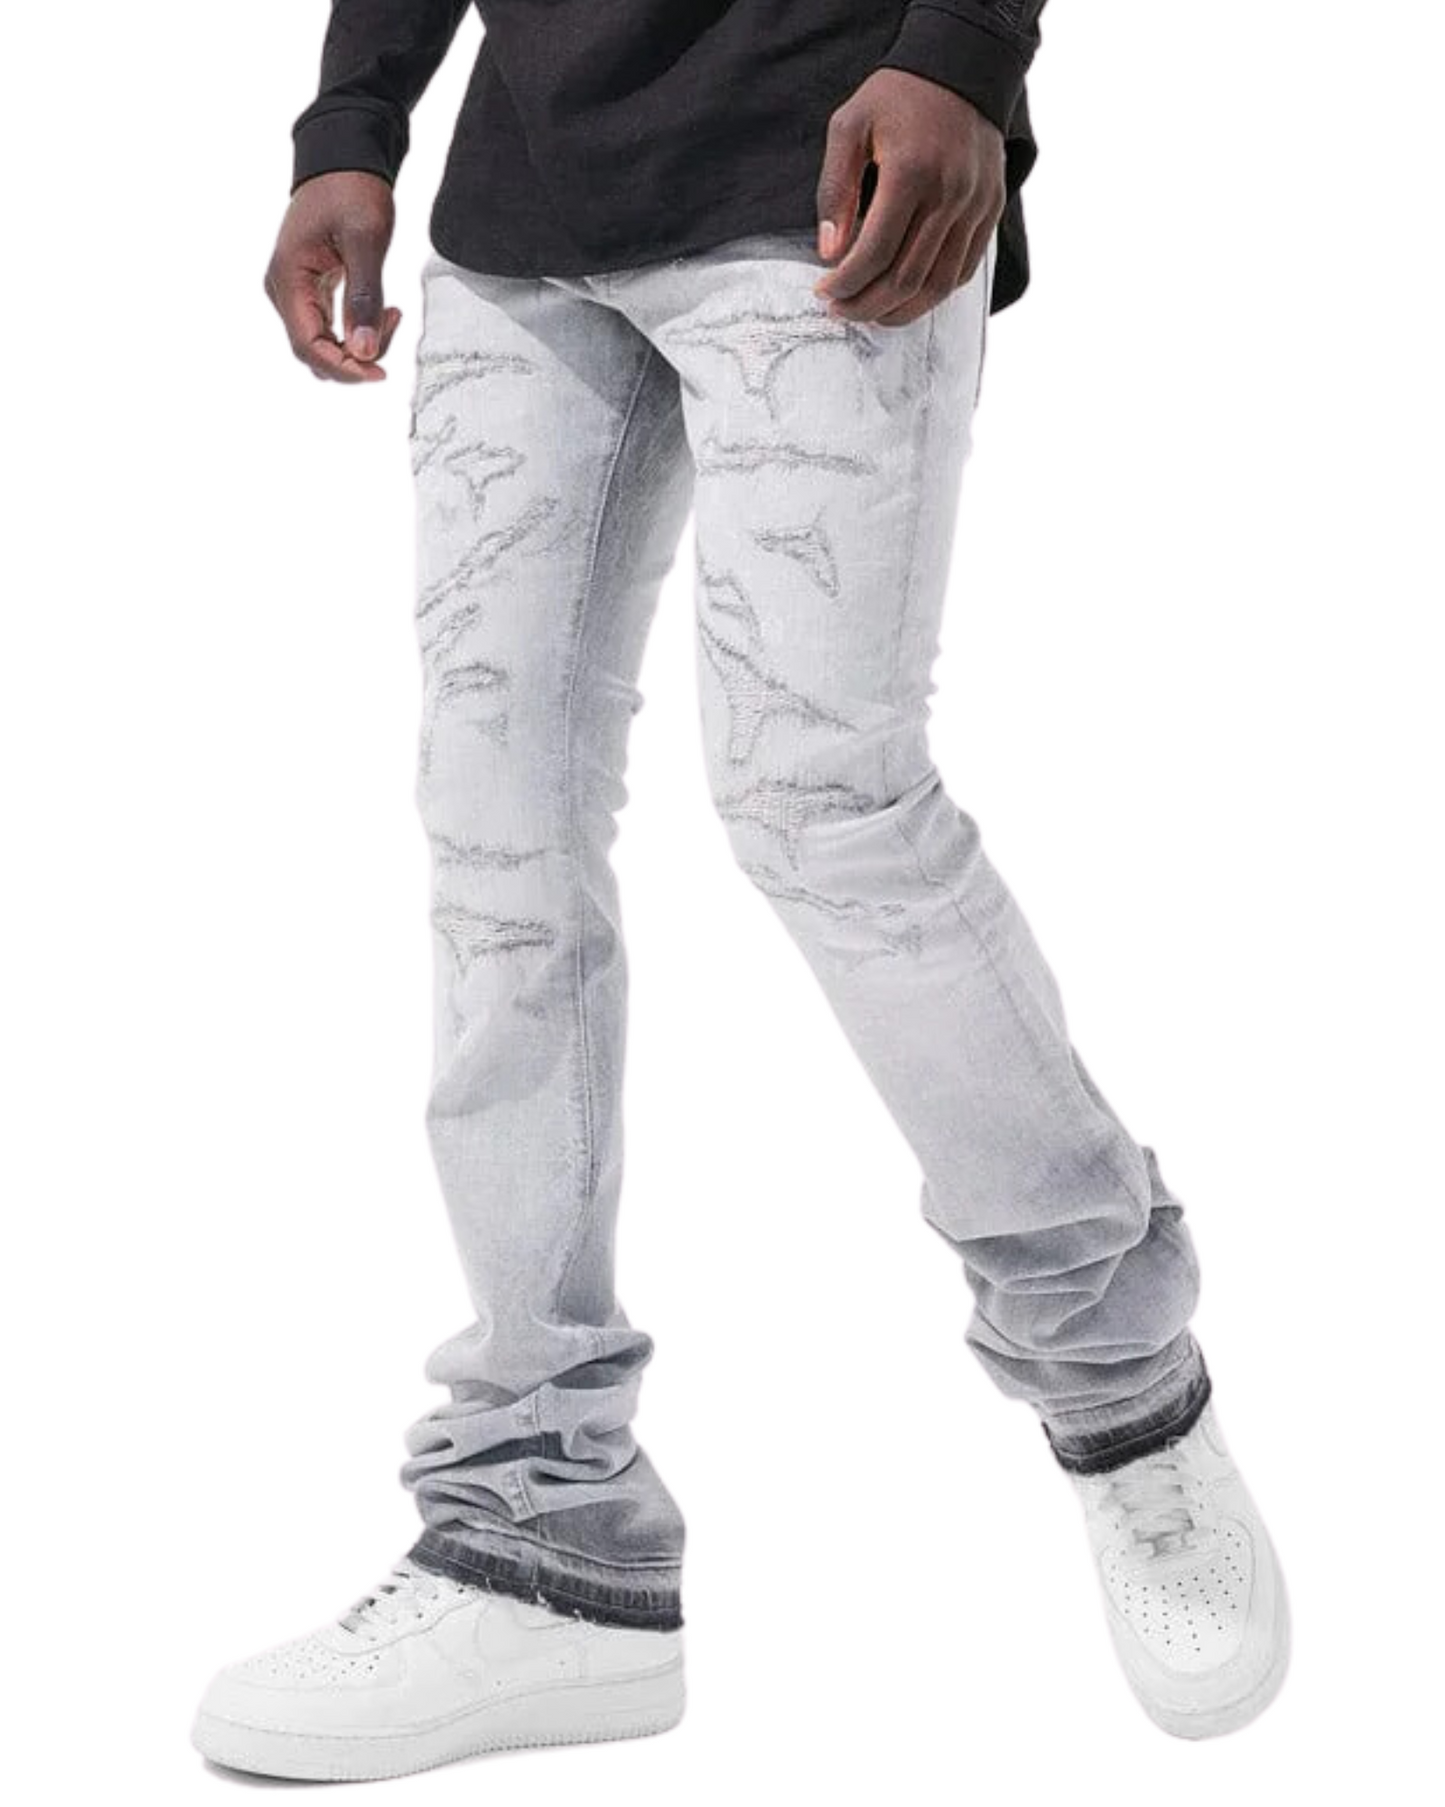 Martin Stacked Crouching Tiger Jeans JTF91628